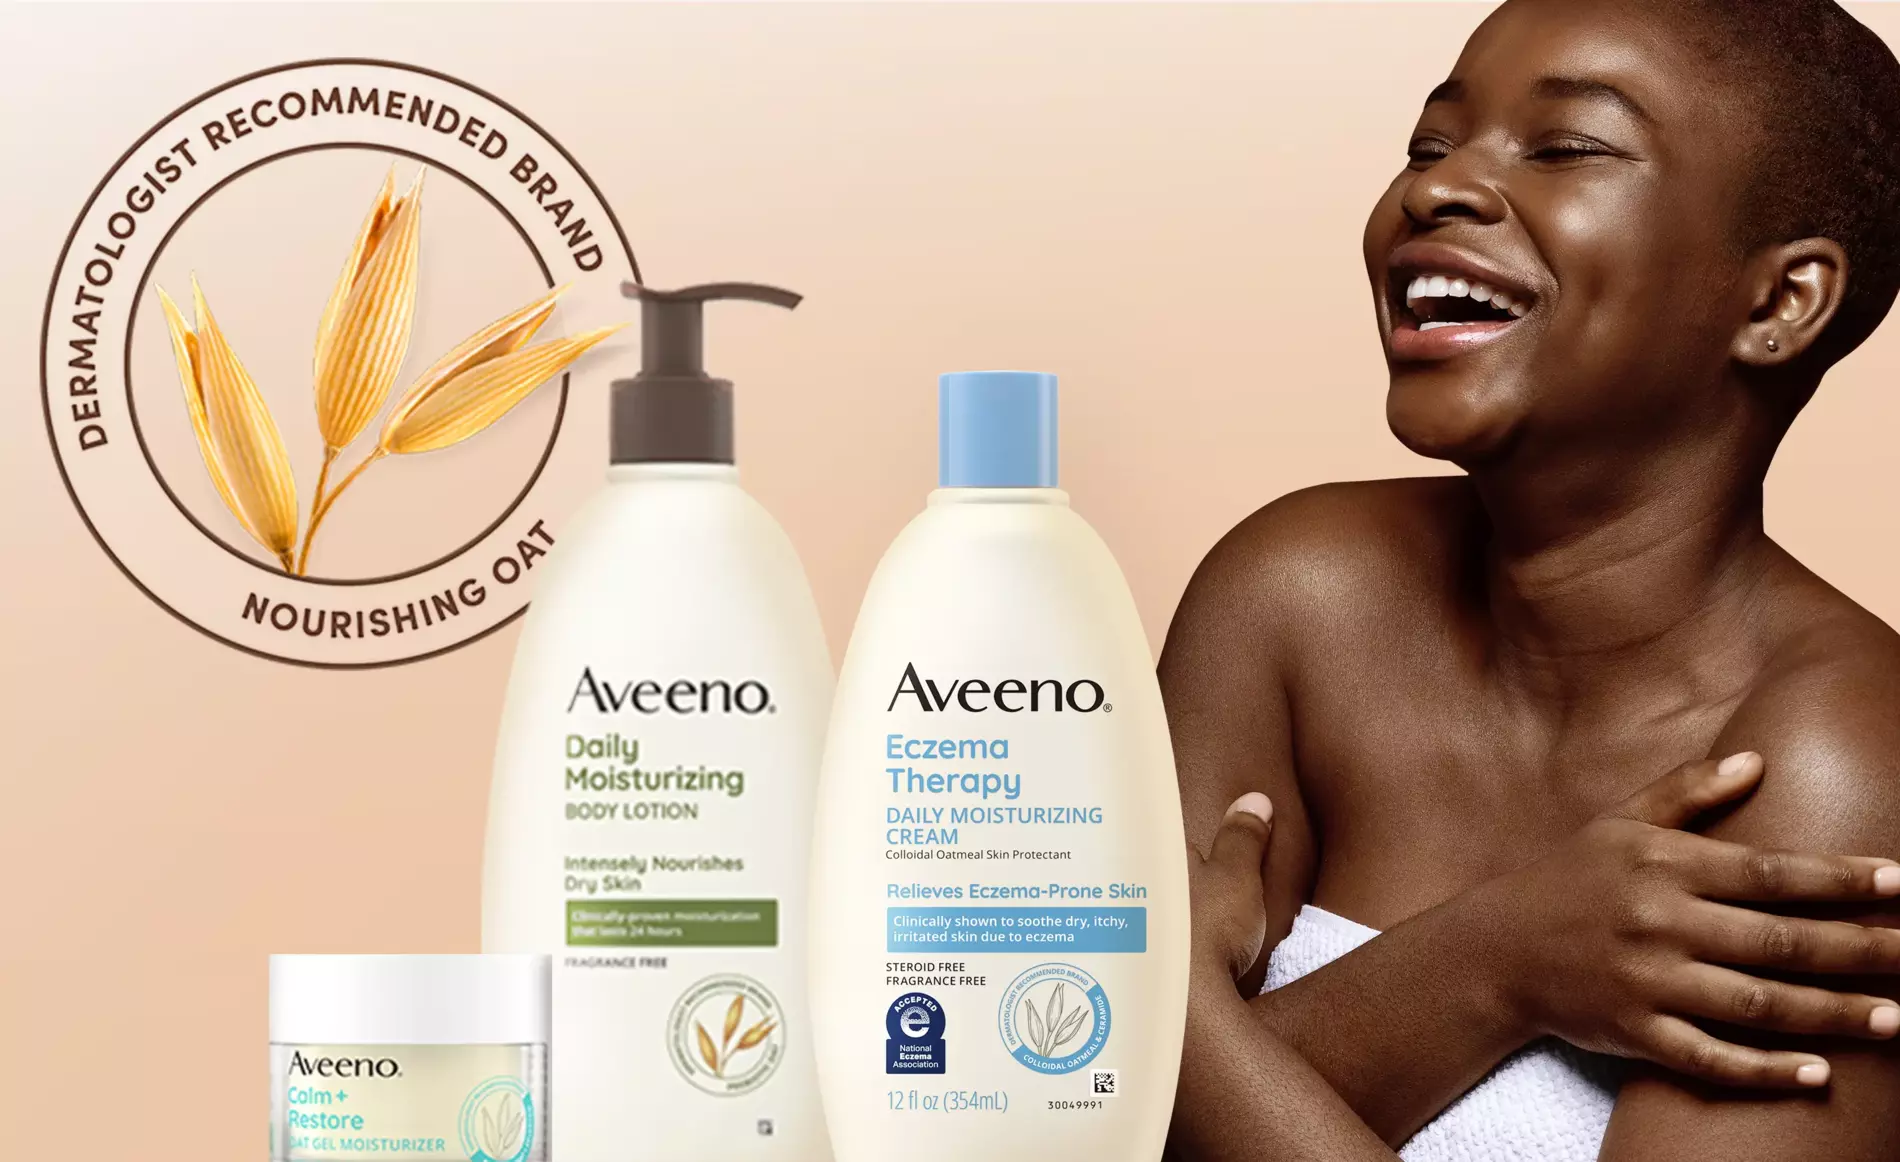 Aveeno The Secret is Oat Banner Woman Laughing with Aveeno Products